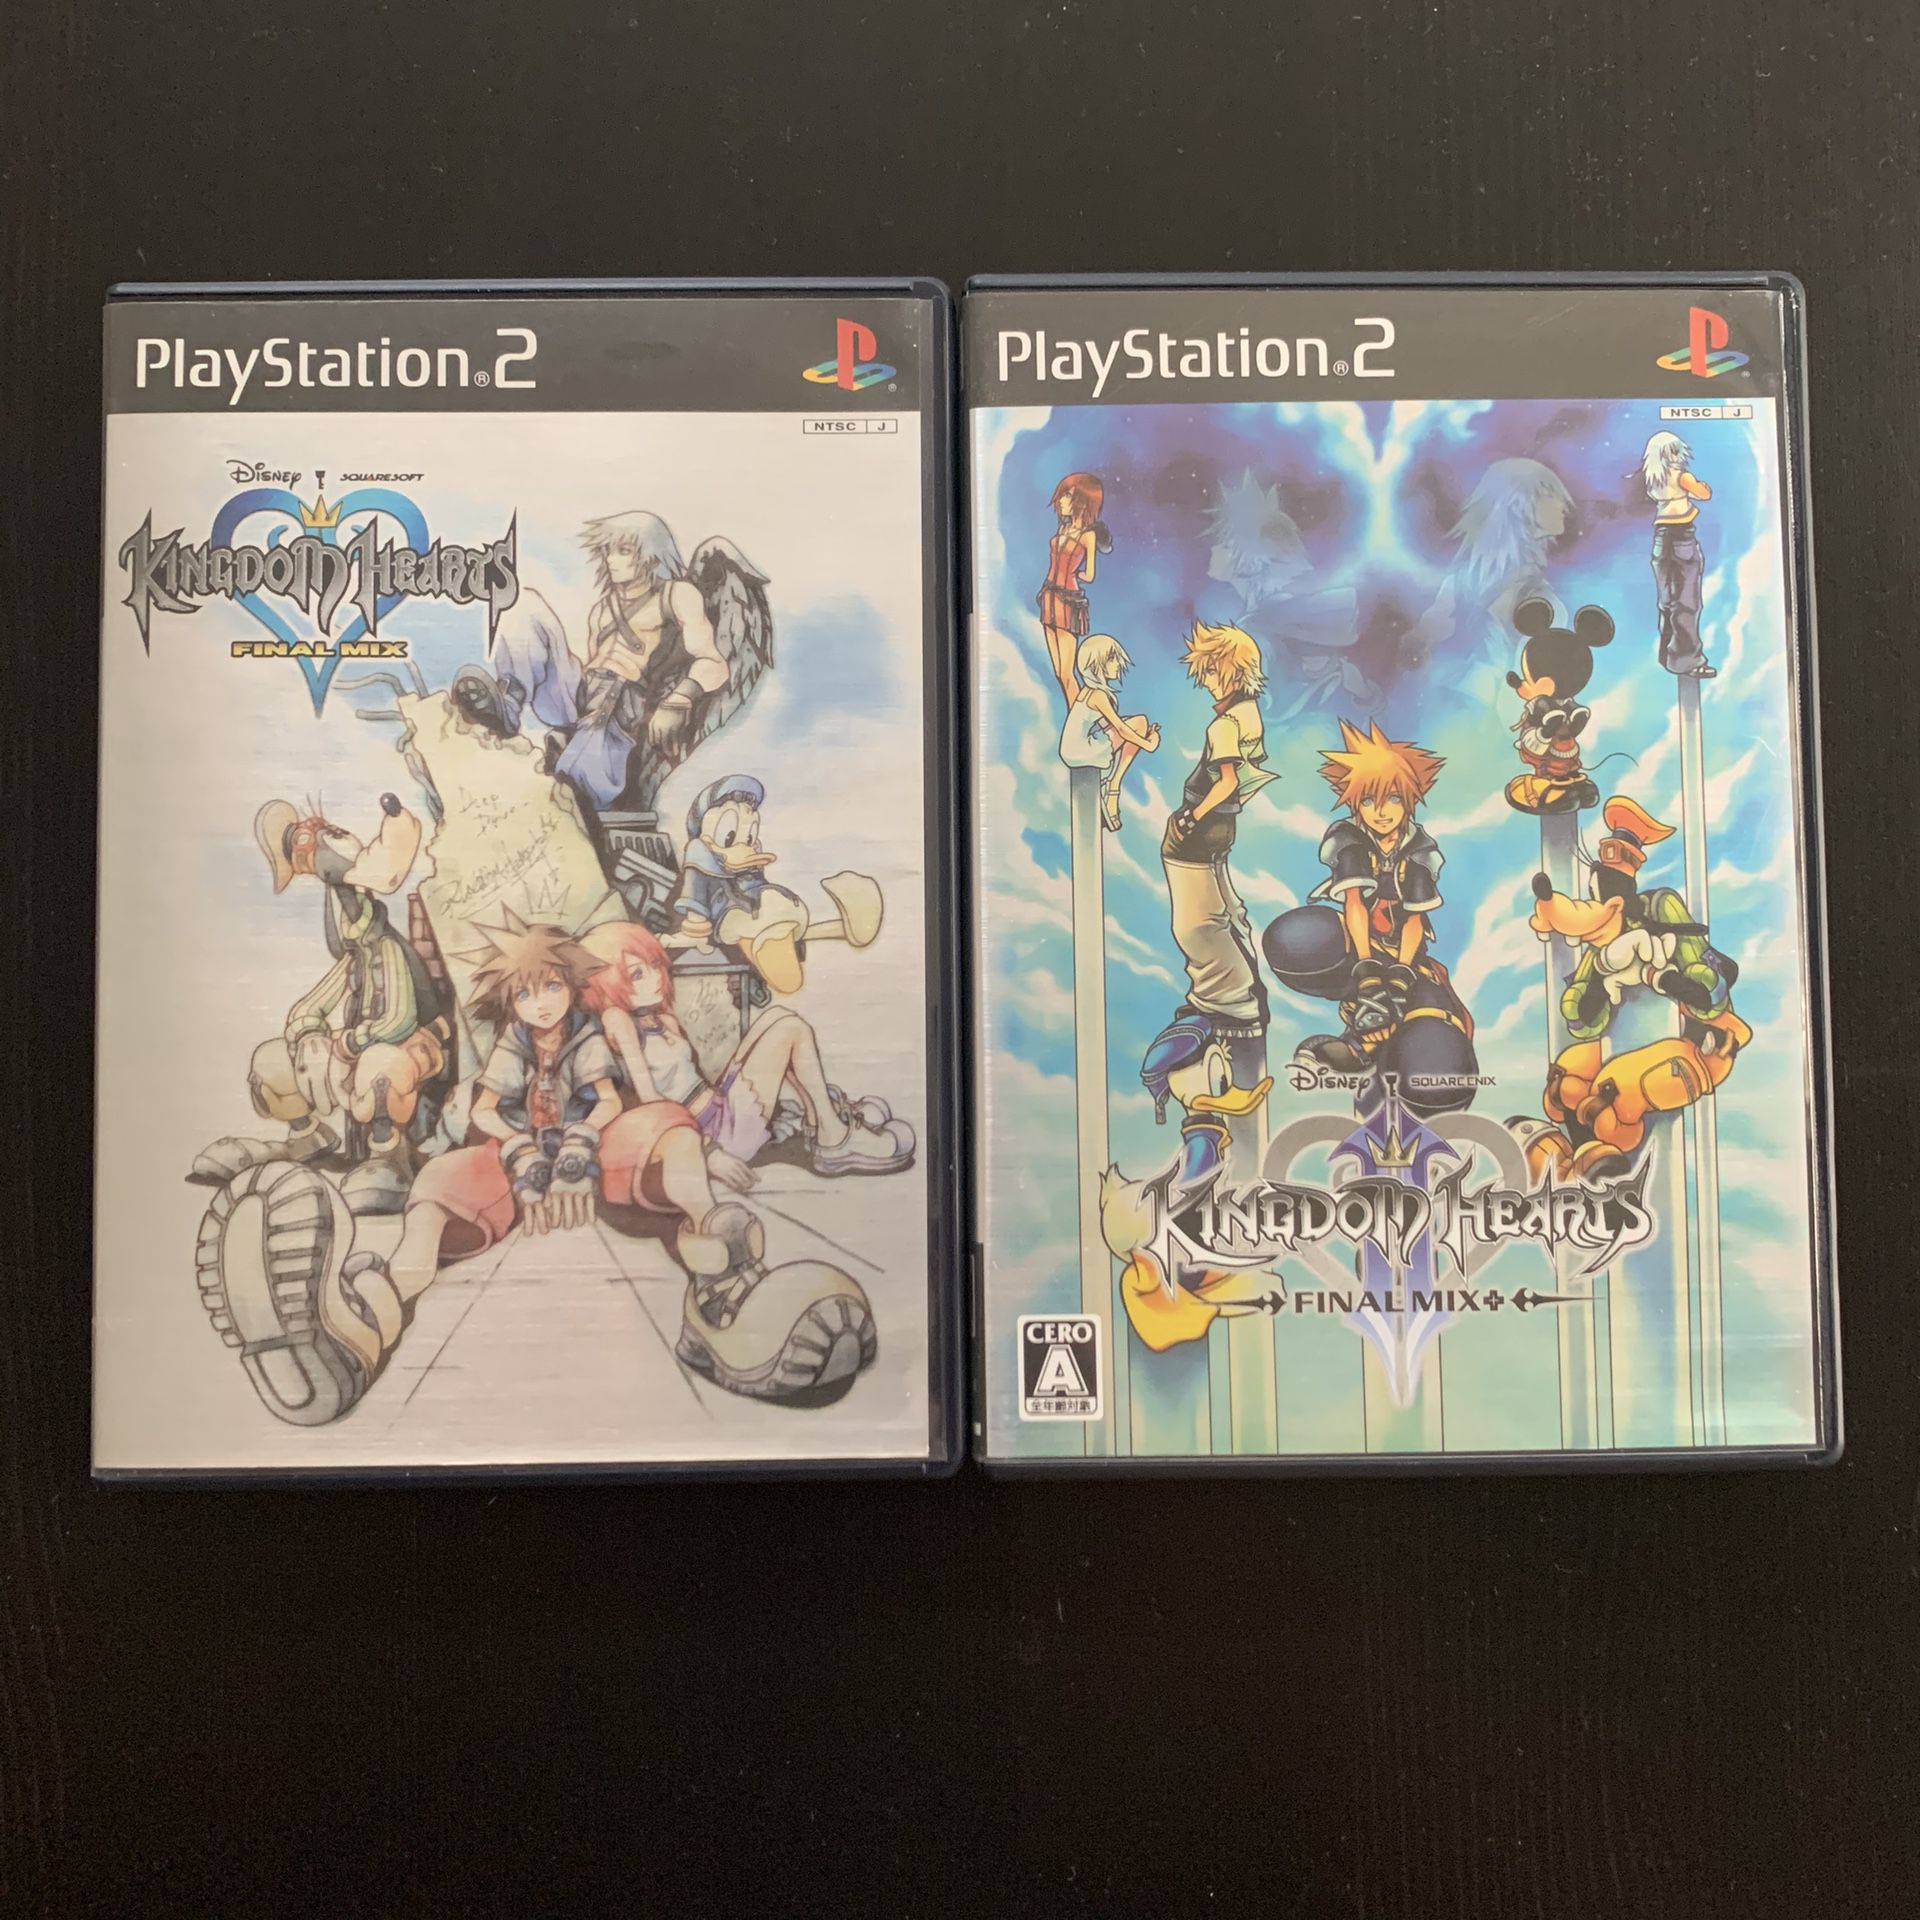 Kingdom Hearts 1&2 Final Mix and Final Mix+ for PS2 (JAPANESE IMPORT)